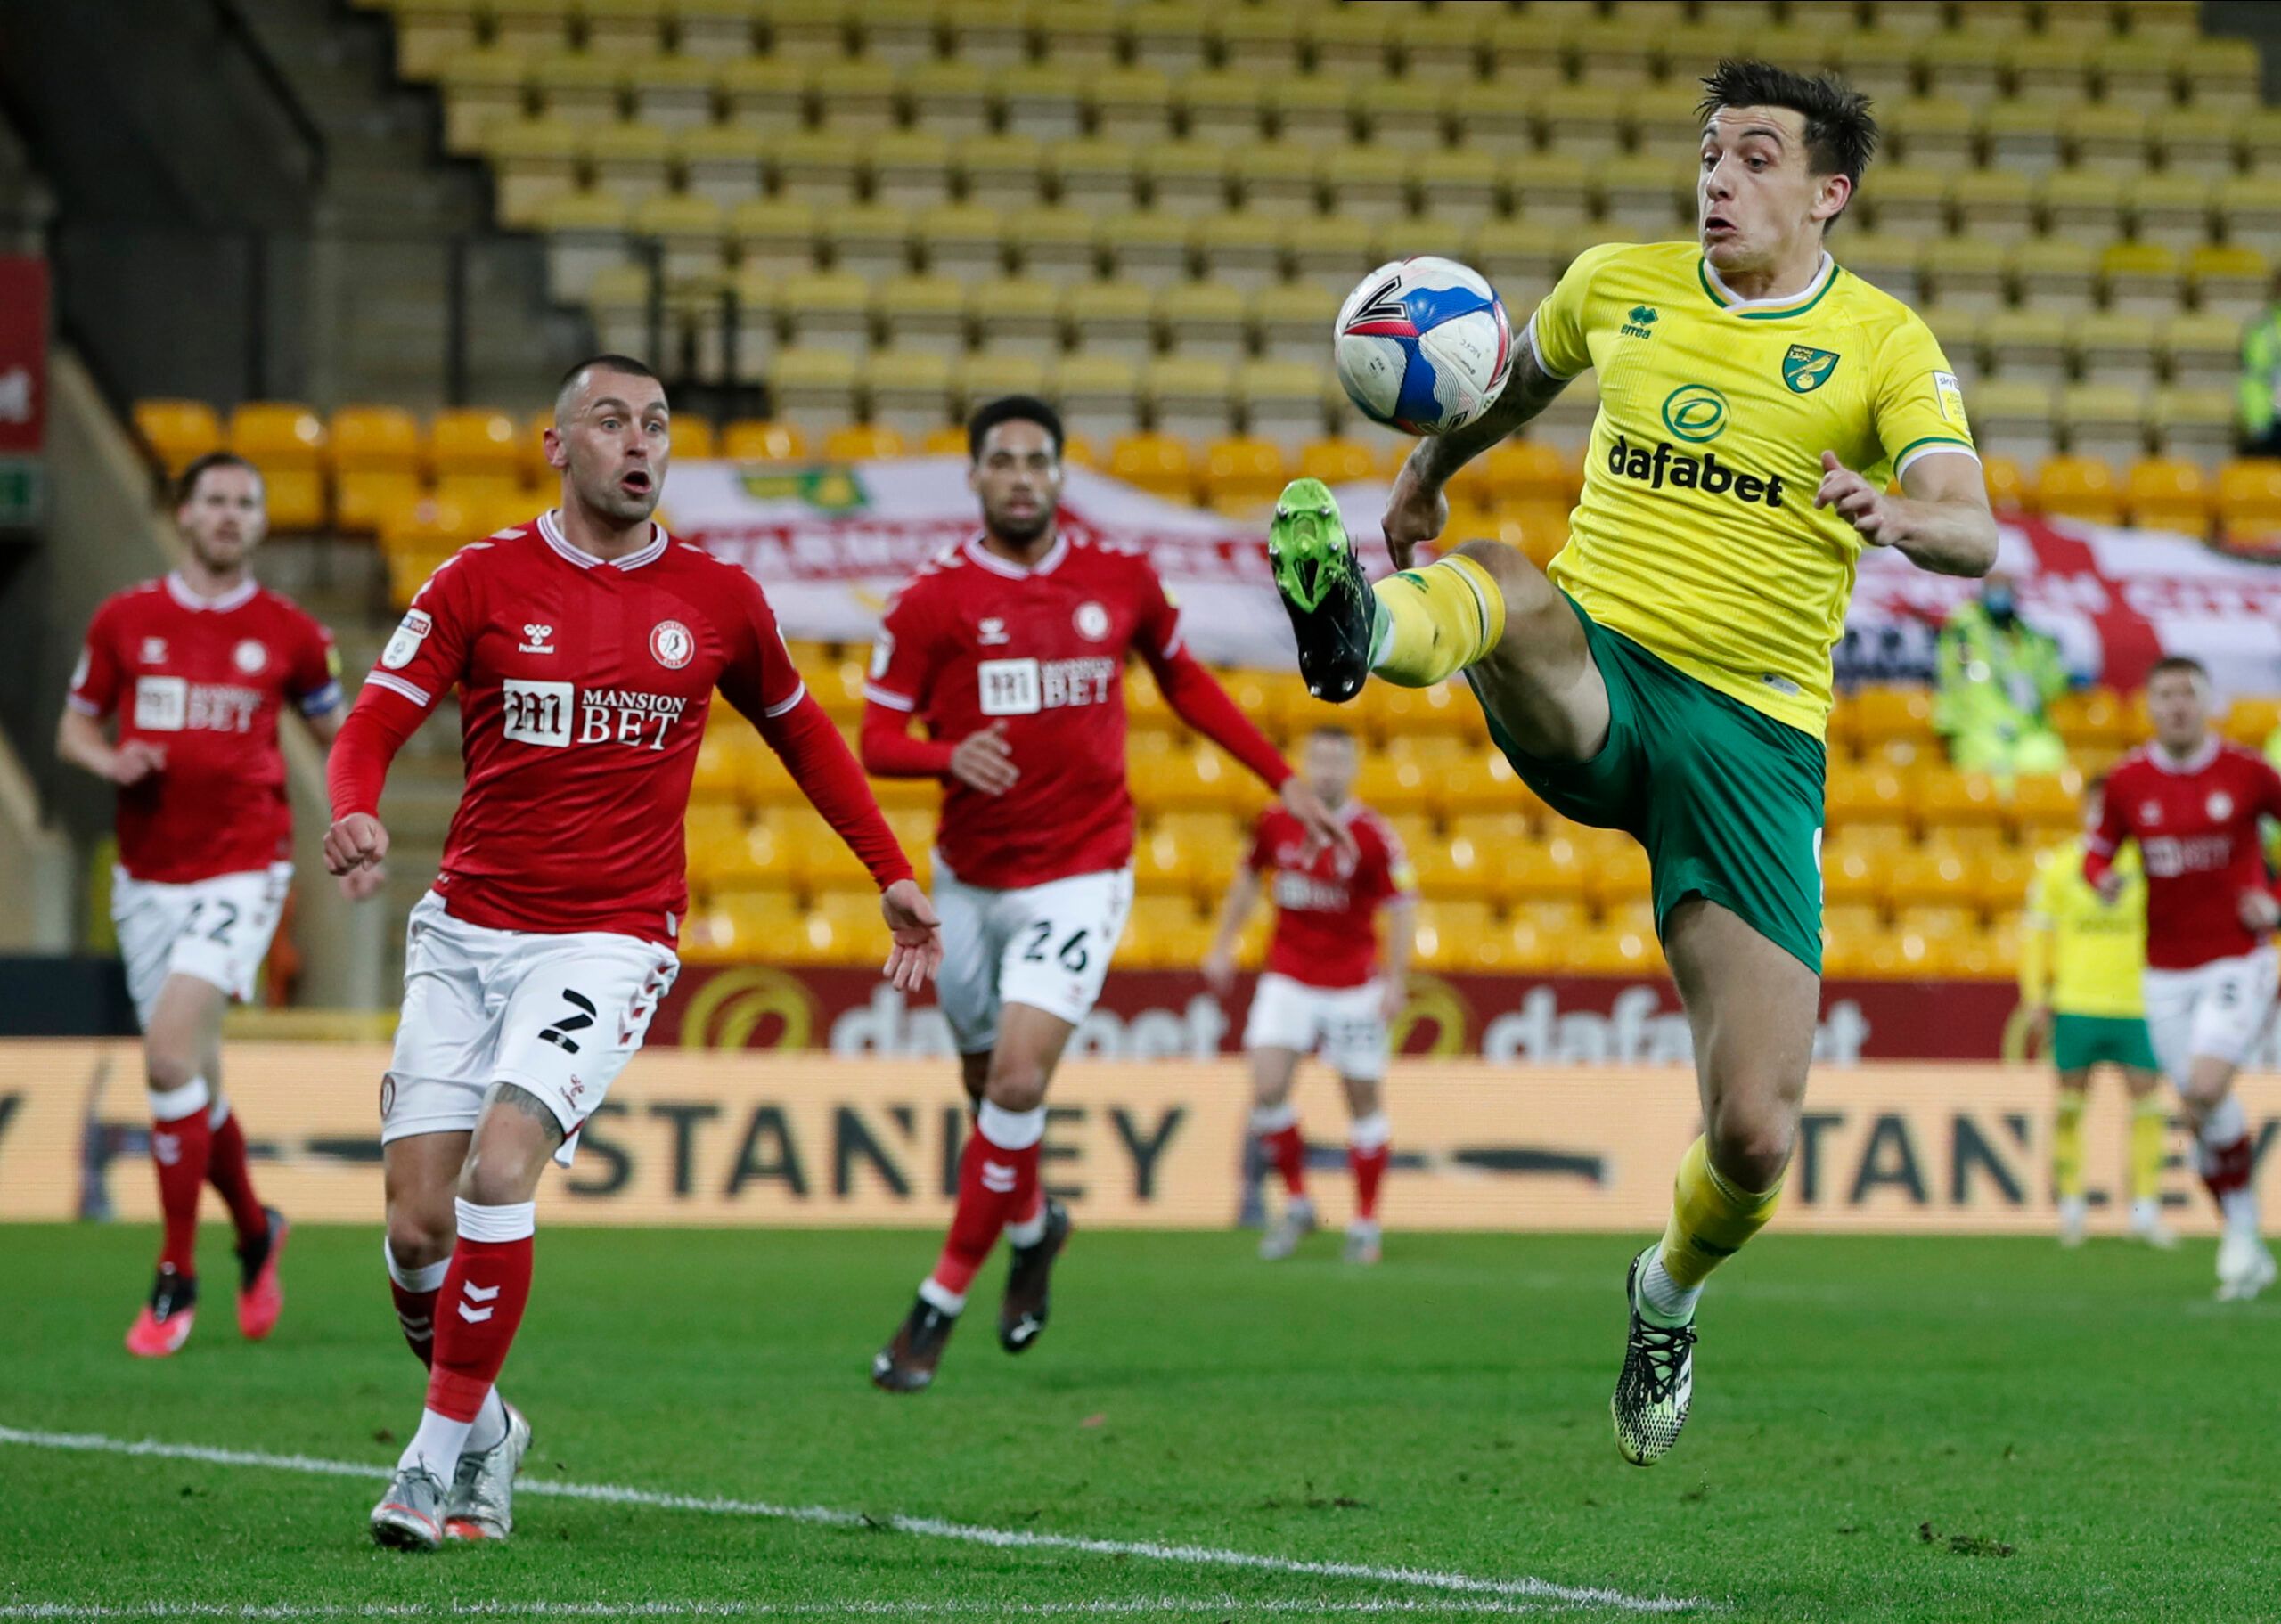 Soccer Football - Championship - Norwich City v Bristol City - Carrow Road, Norwich, Britain - January 20, 2021  Norwich City's Jordan Hugill in action Action Images/Paul Childs EDITORIAL USE ONLY. No use with unauthorized audio, video, data, fixture lists, club/league logos or 'live' services. Online in-match use limited to 75 images, no video emulation. No use in betting, games or single club /league/player publications.  Please contact your account representative for further details.